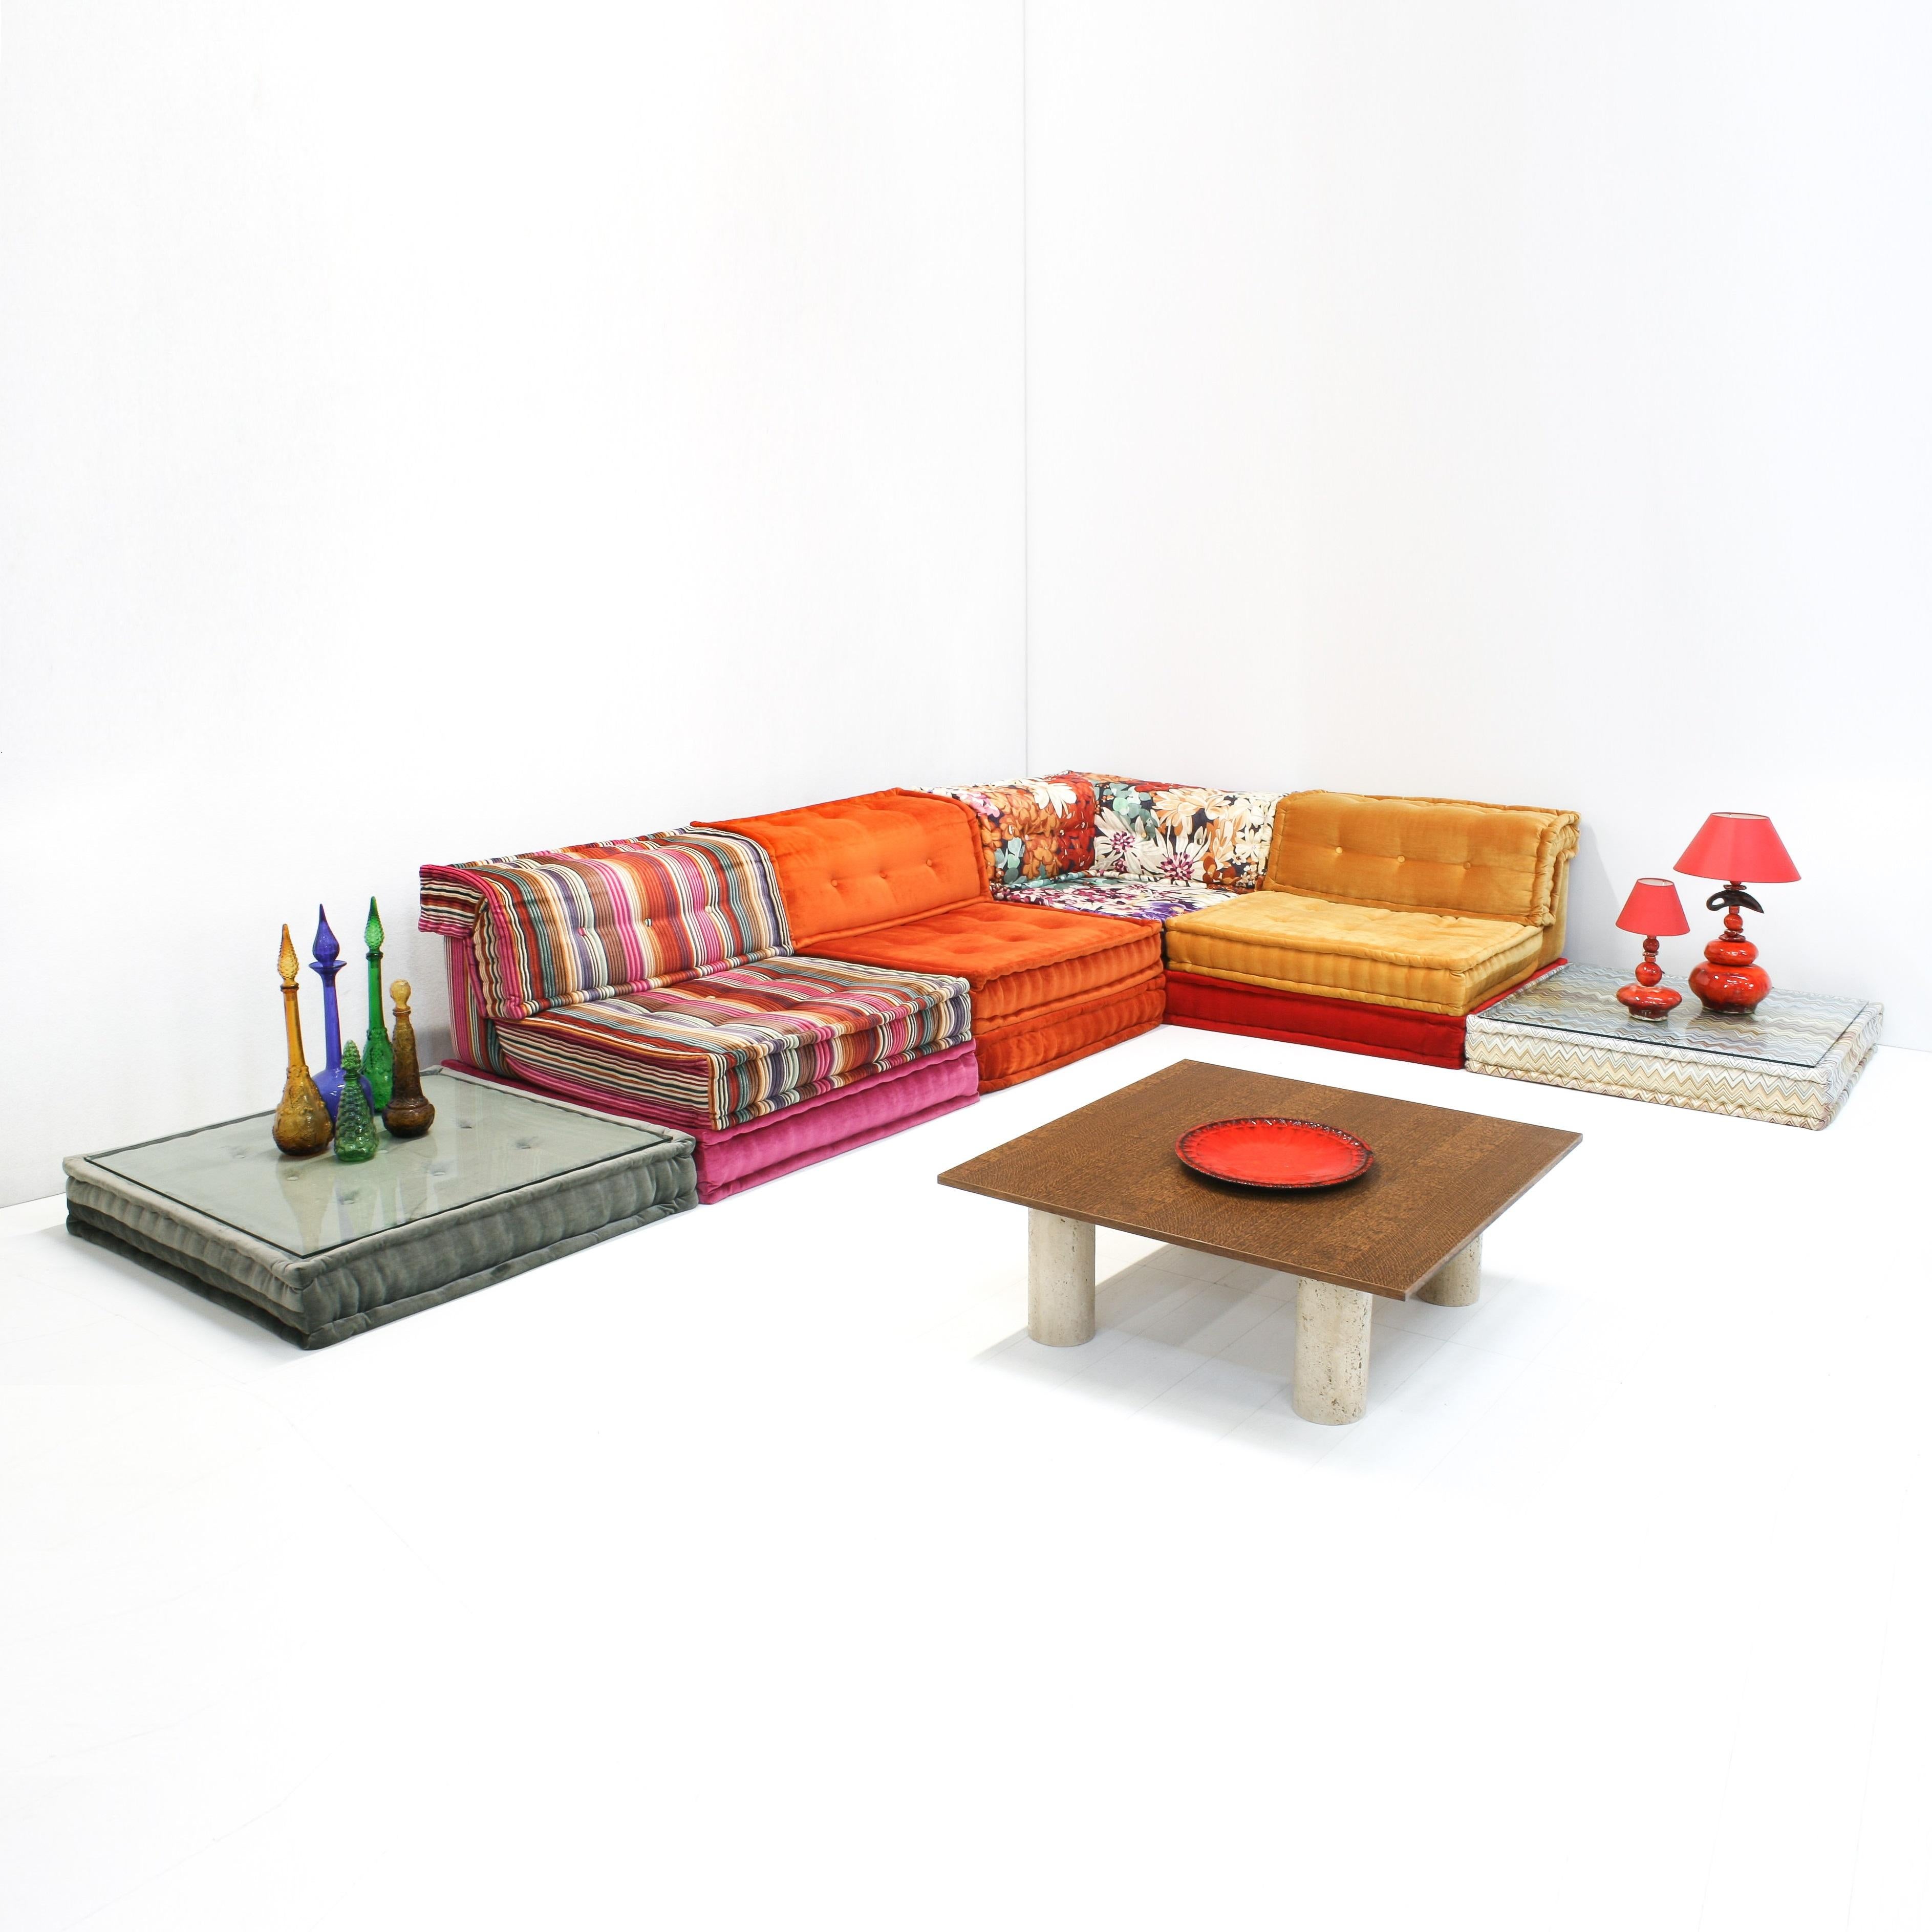 The Mah Jong sofa group was designed by Hans Hopfer for Roche Bobois in 1971.

Large modular sofa with a mixture of components, hand-sewn rolled edge, quilted seat and back cushions, upholstery designs by Missoni Home. The set comprises of 14 parts